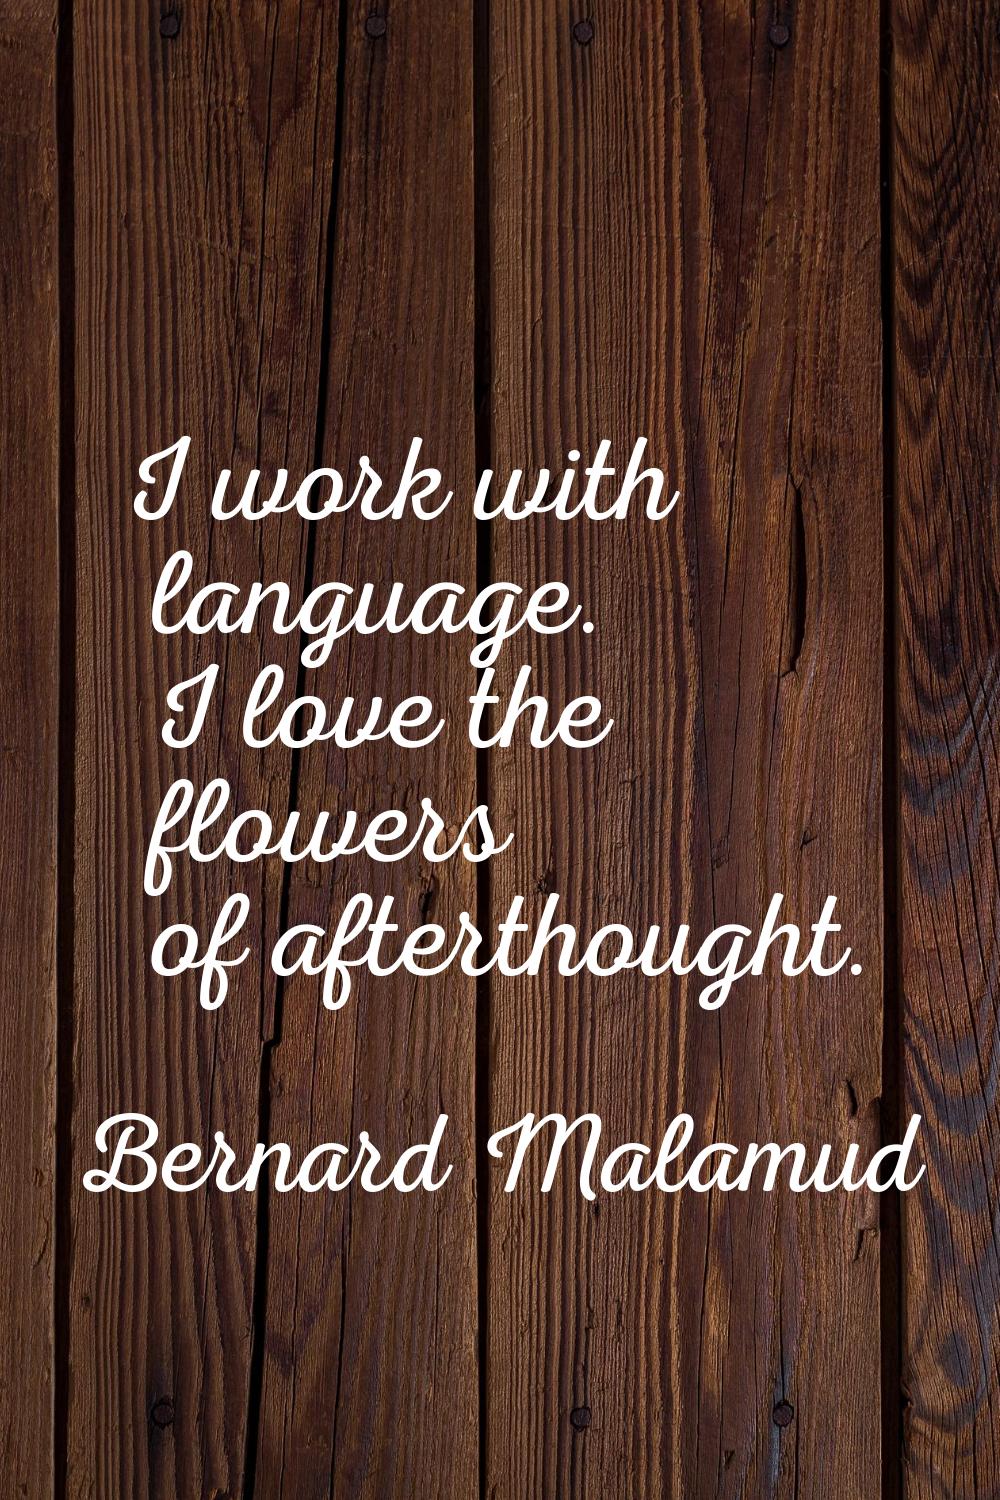 I work with language. I love the flowers of afterthought.